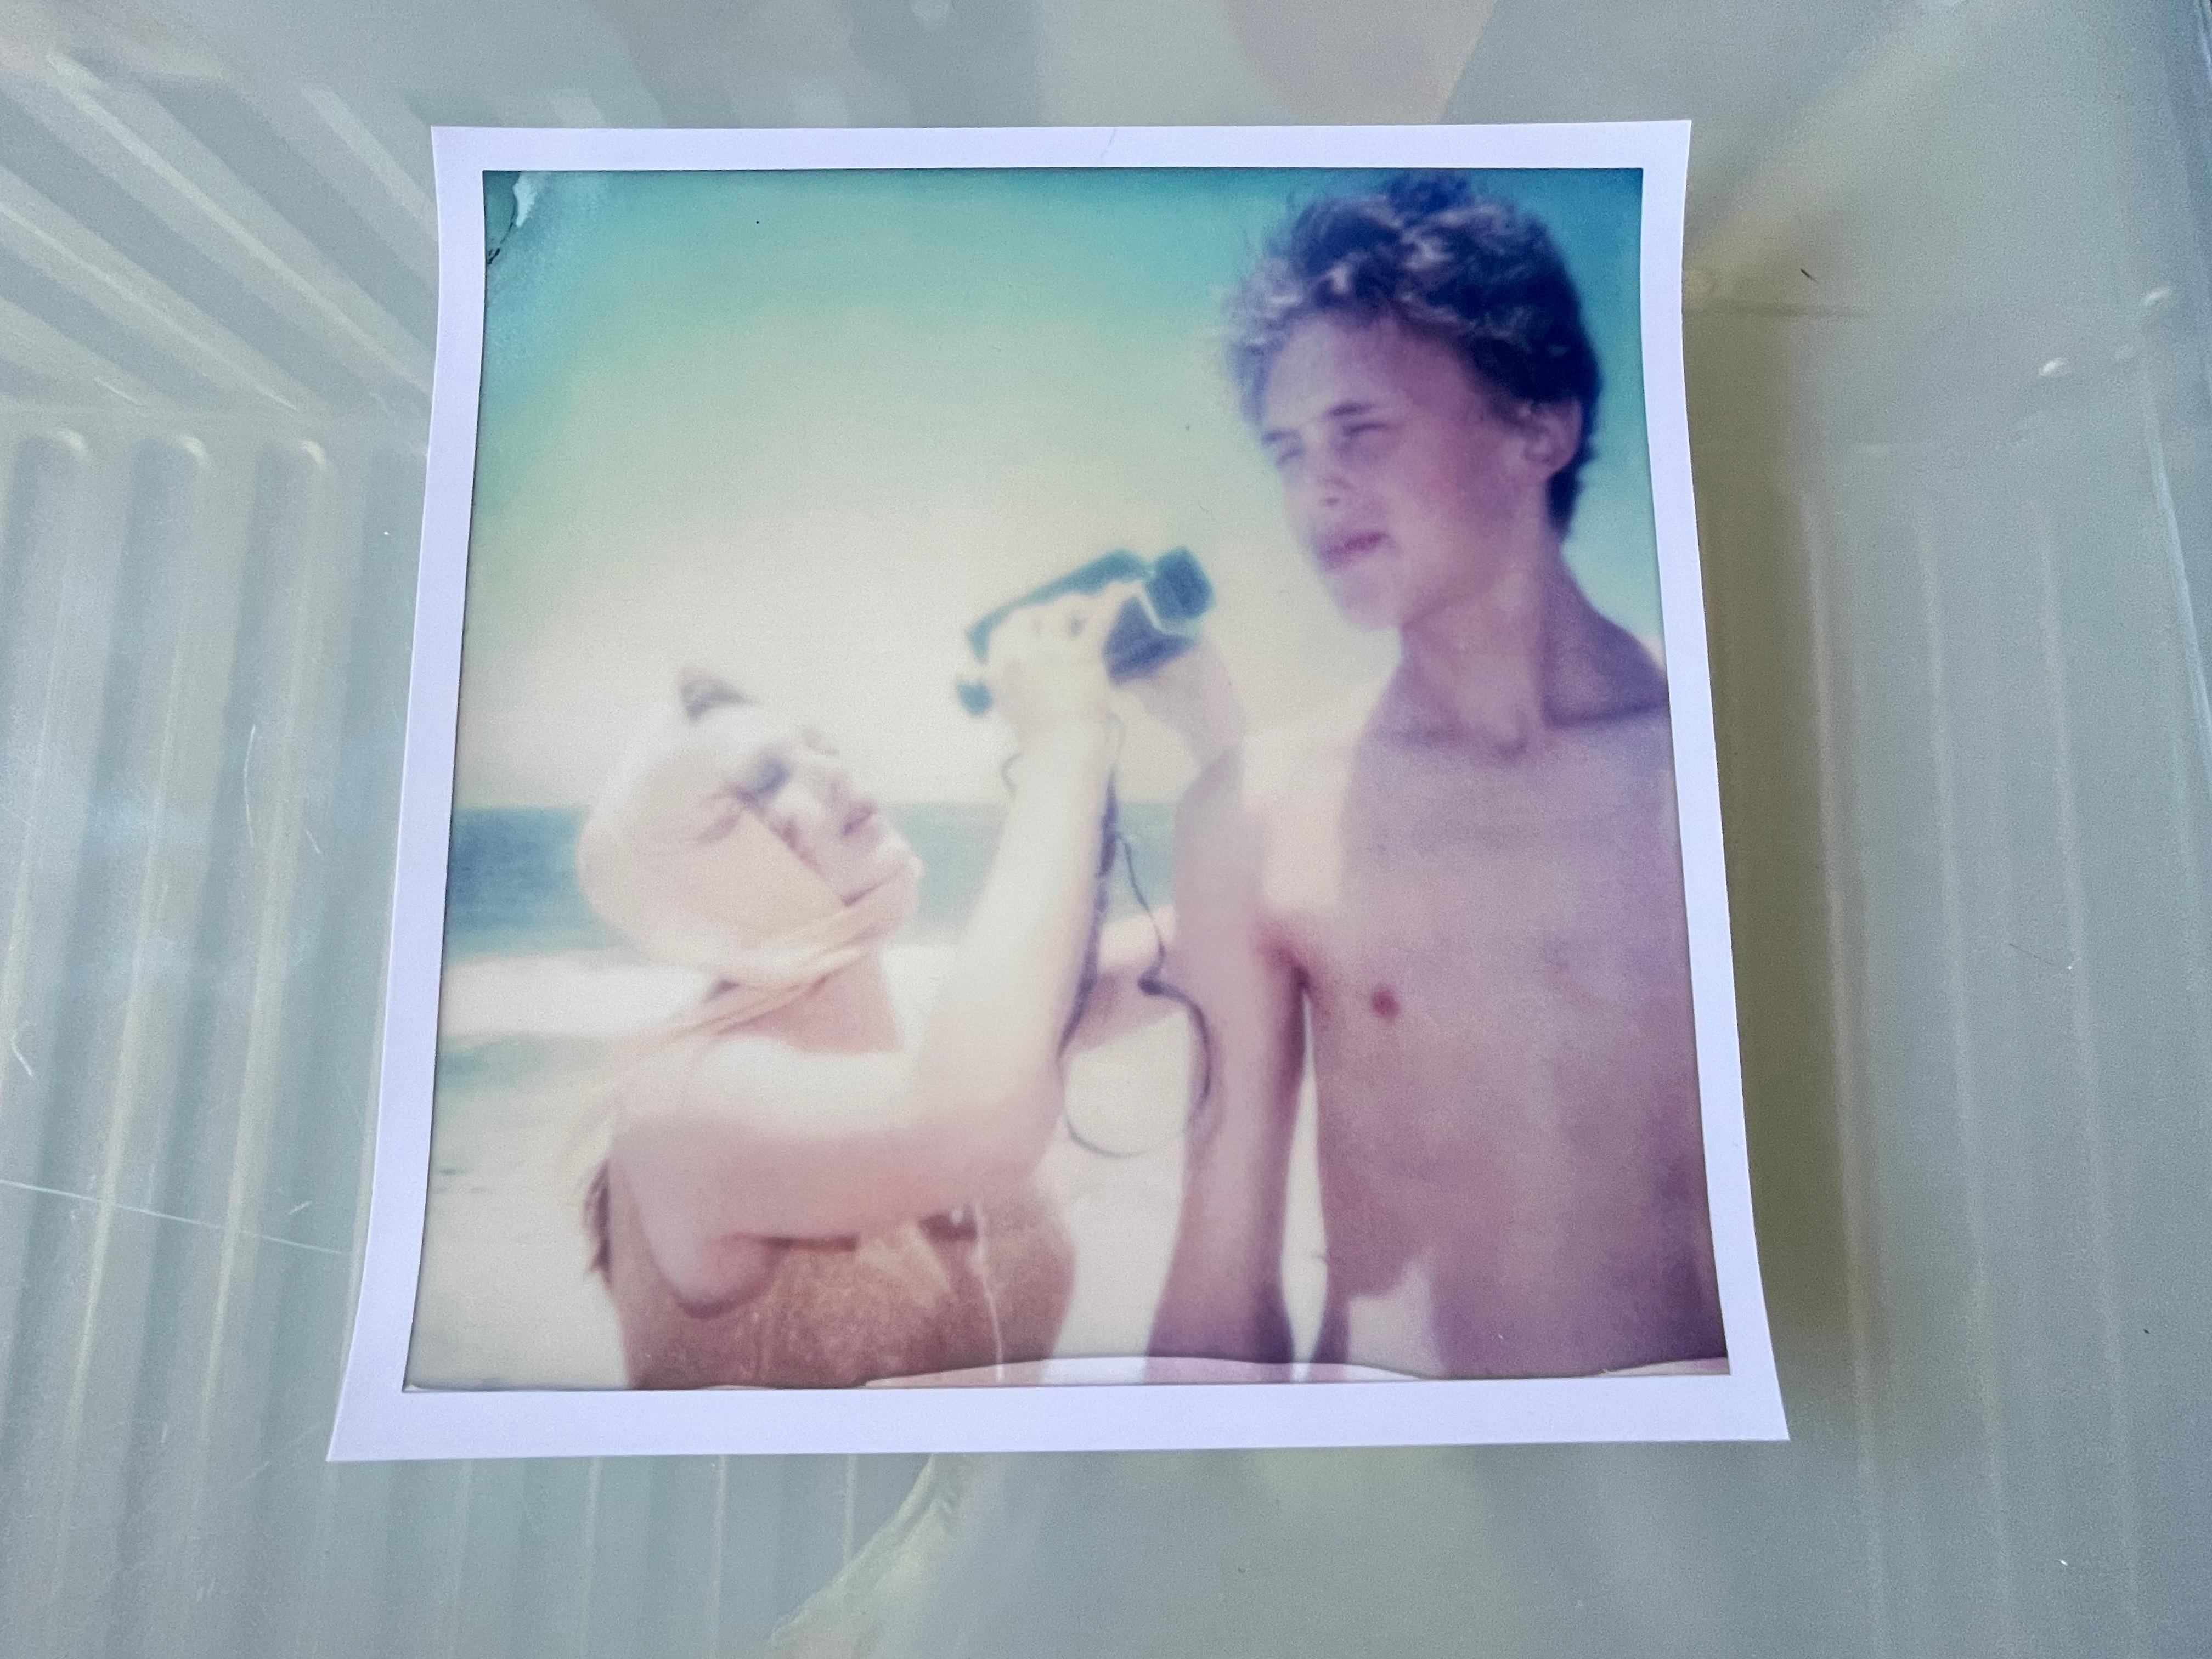 The Diva and the Boy (Beachshoot) - 9 pieces - Polaroid, Vintage, Contemporary For Sale 5